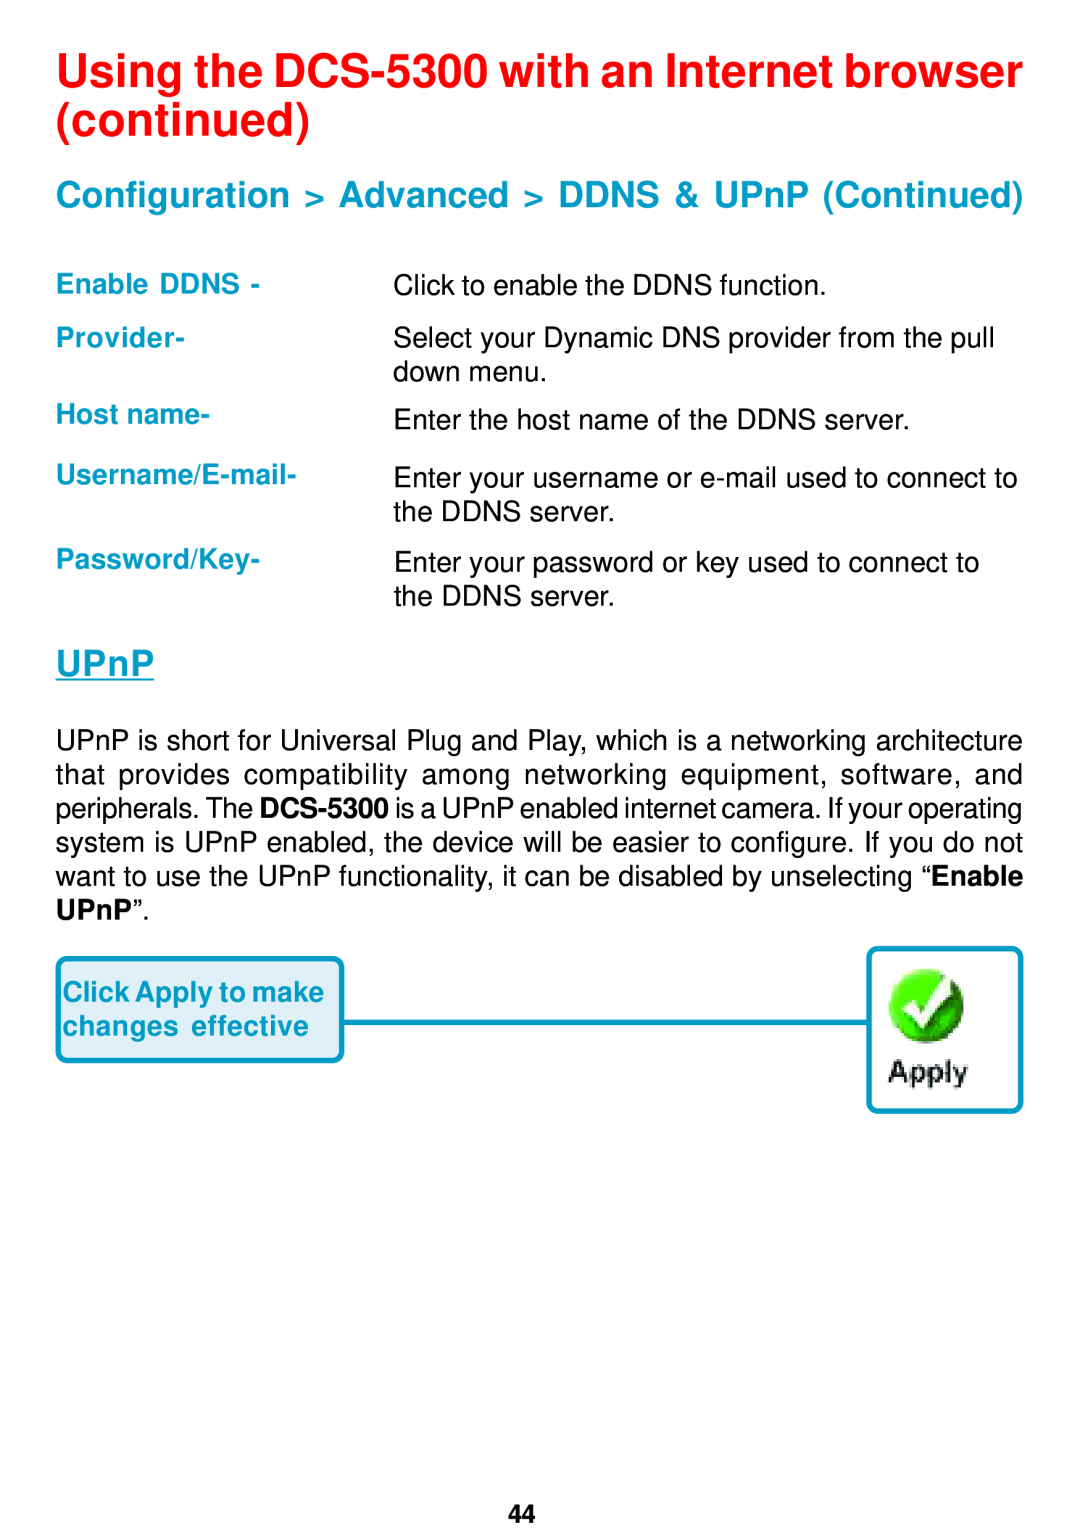 D-Link manual Configuration Advanced DDNS & UPnP Continued, Using the DCS-5300 with an Internet browser continued 